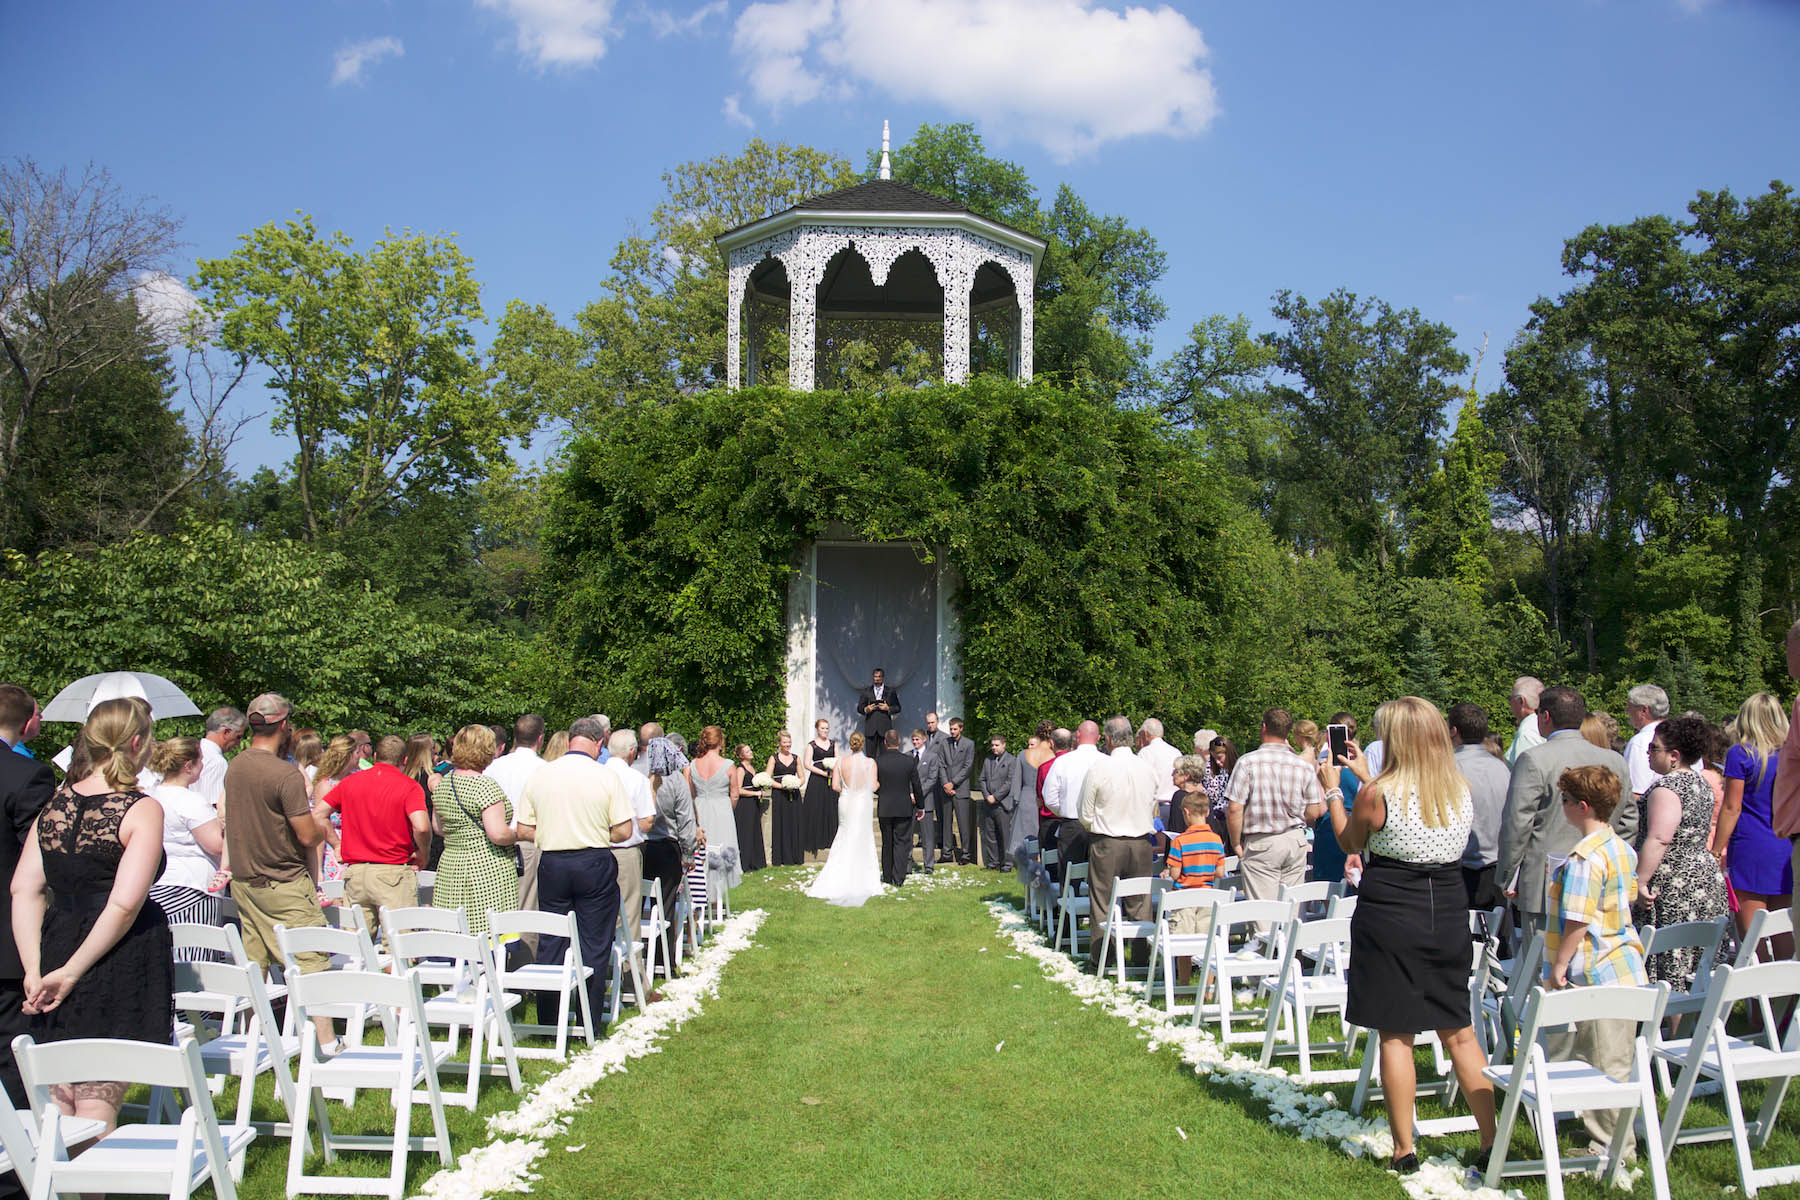 Outdoor wedding ceremony of Jaclyn & Scott, Allerton Park, Monticello. Wedding photography by Tiffany & Steve of Warmowski Photography.